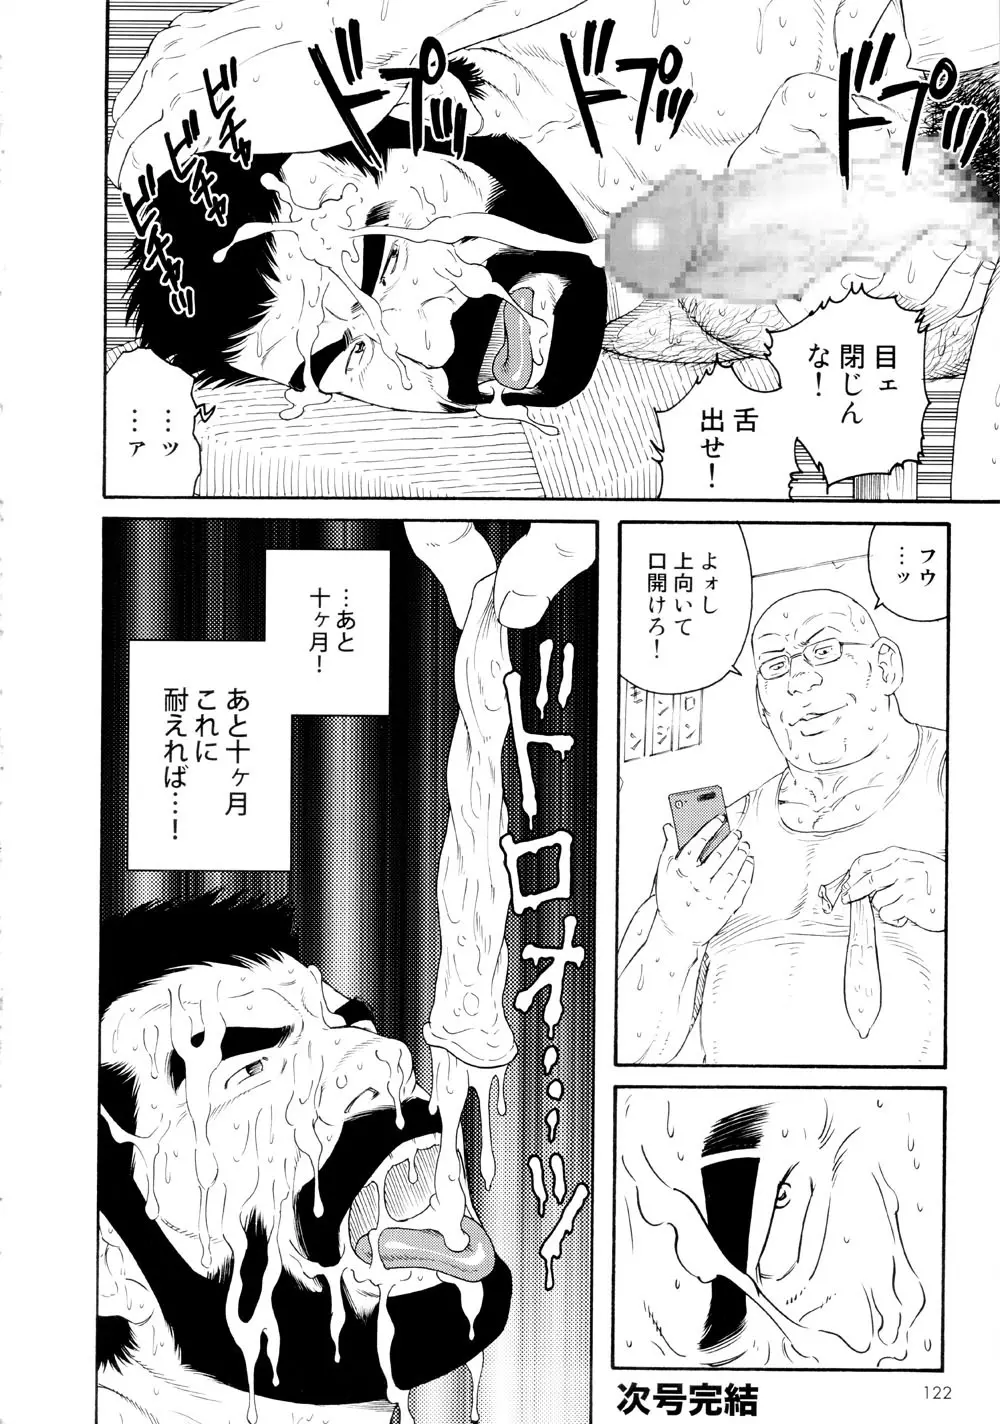 Genryu Chapter 3 Page.16